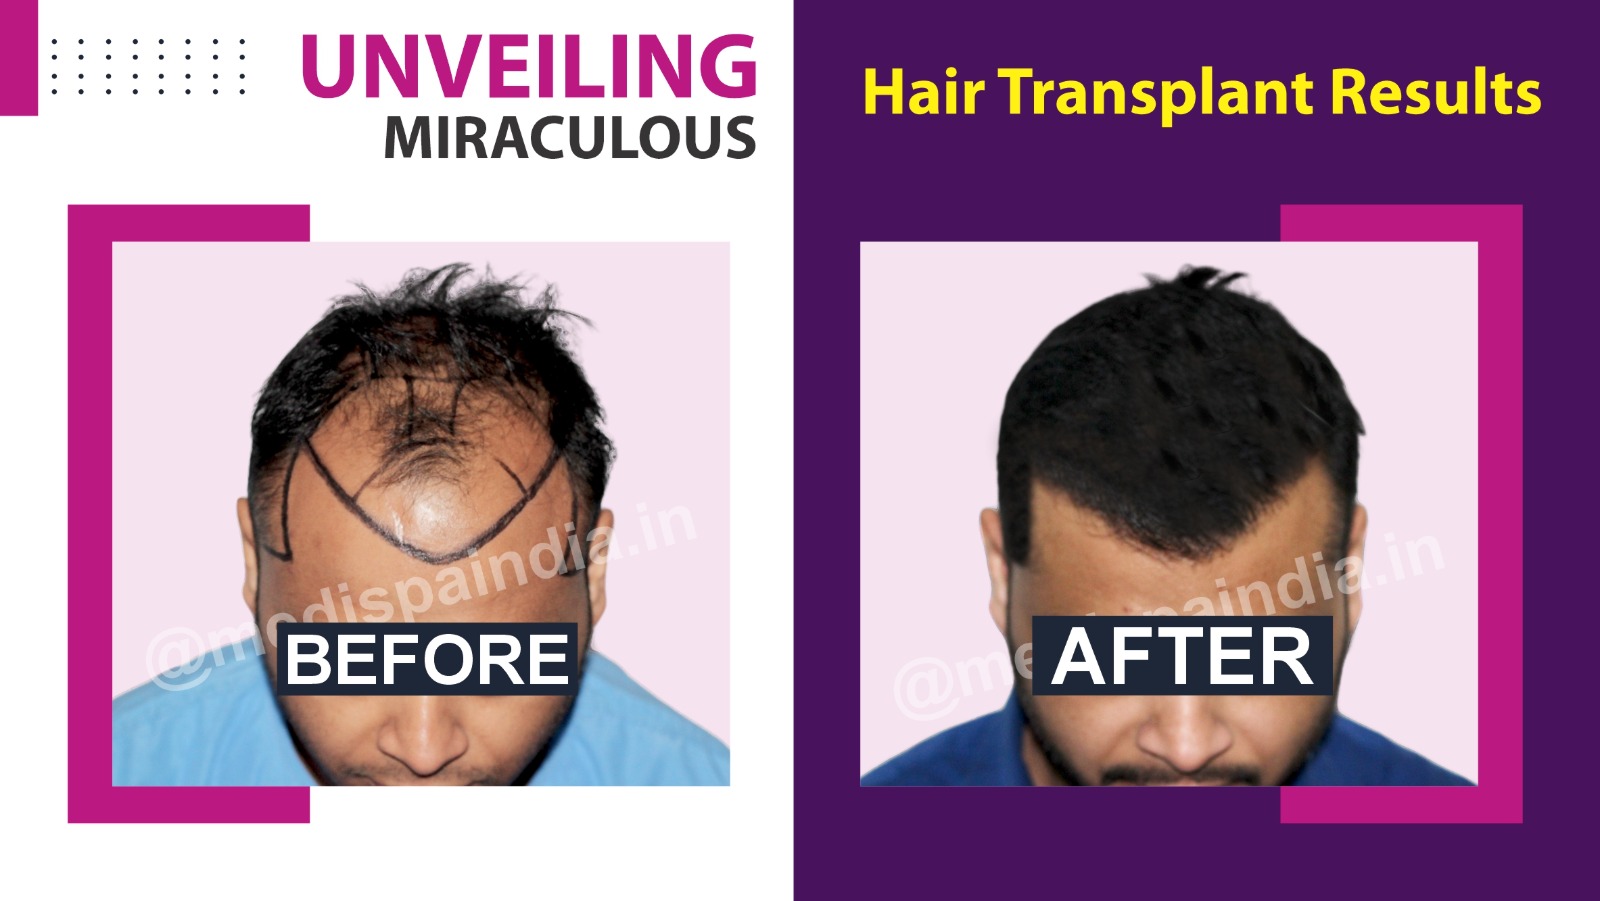 Explain The Qualities And Responsibilities Of A Hair Transplant Surgeon